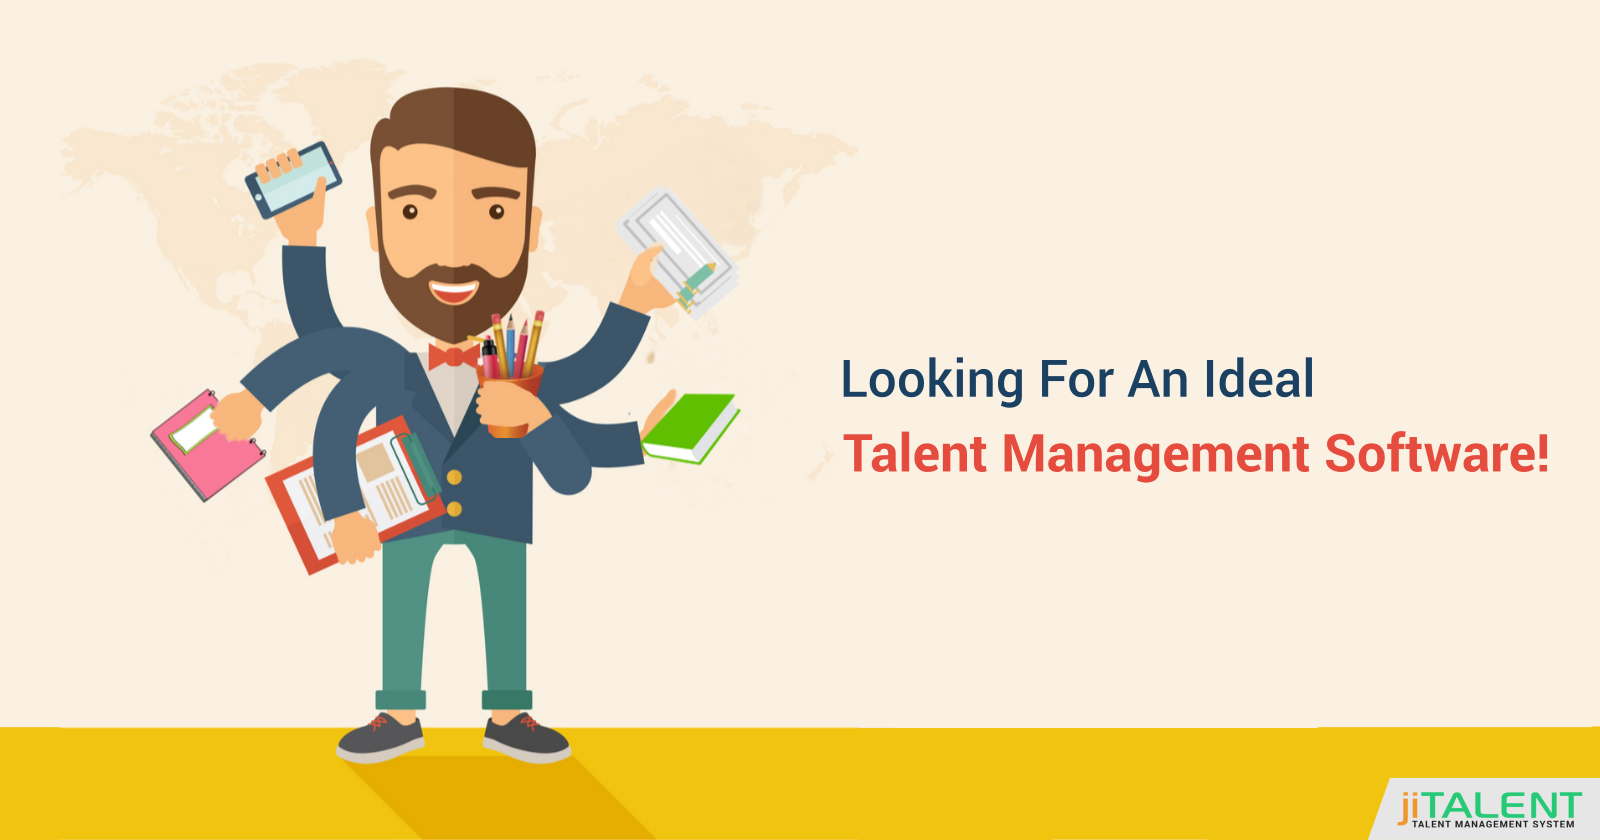 Must have features for your talent management software